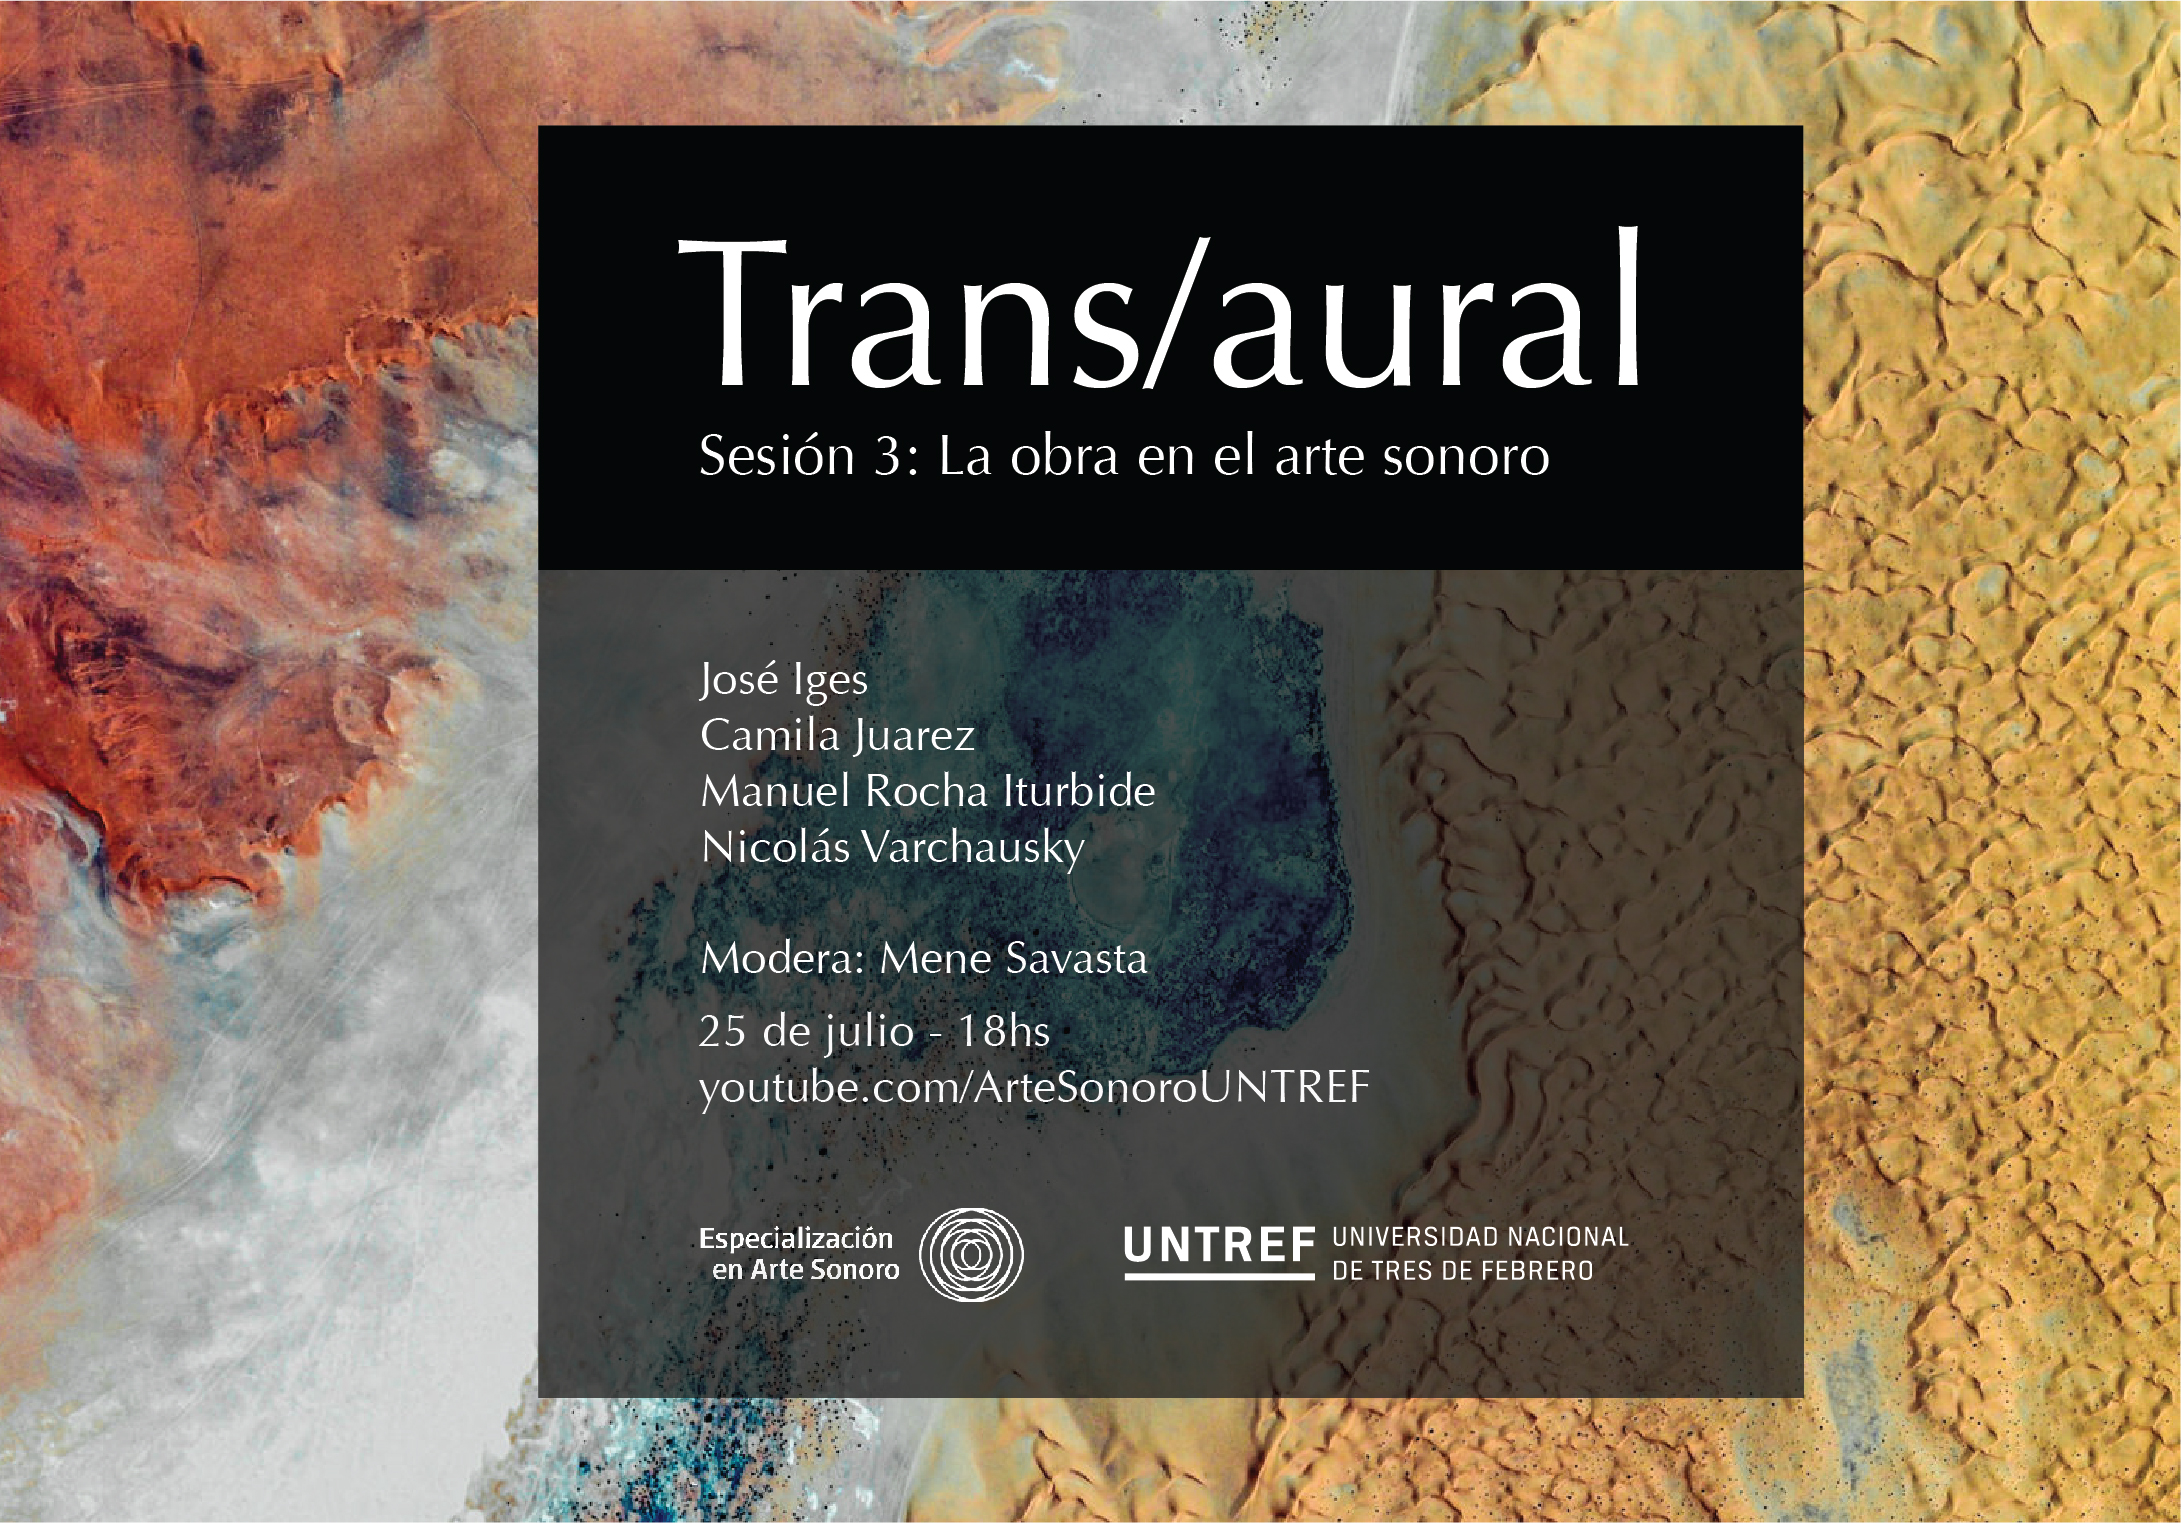 Trans/aural | Virtual session on sound art with José Iges